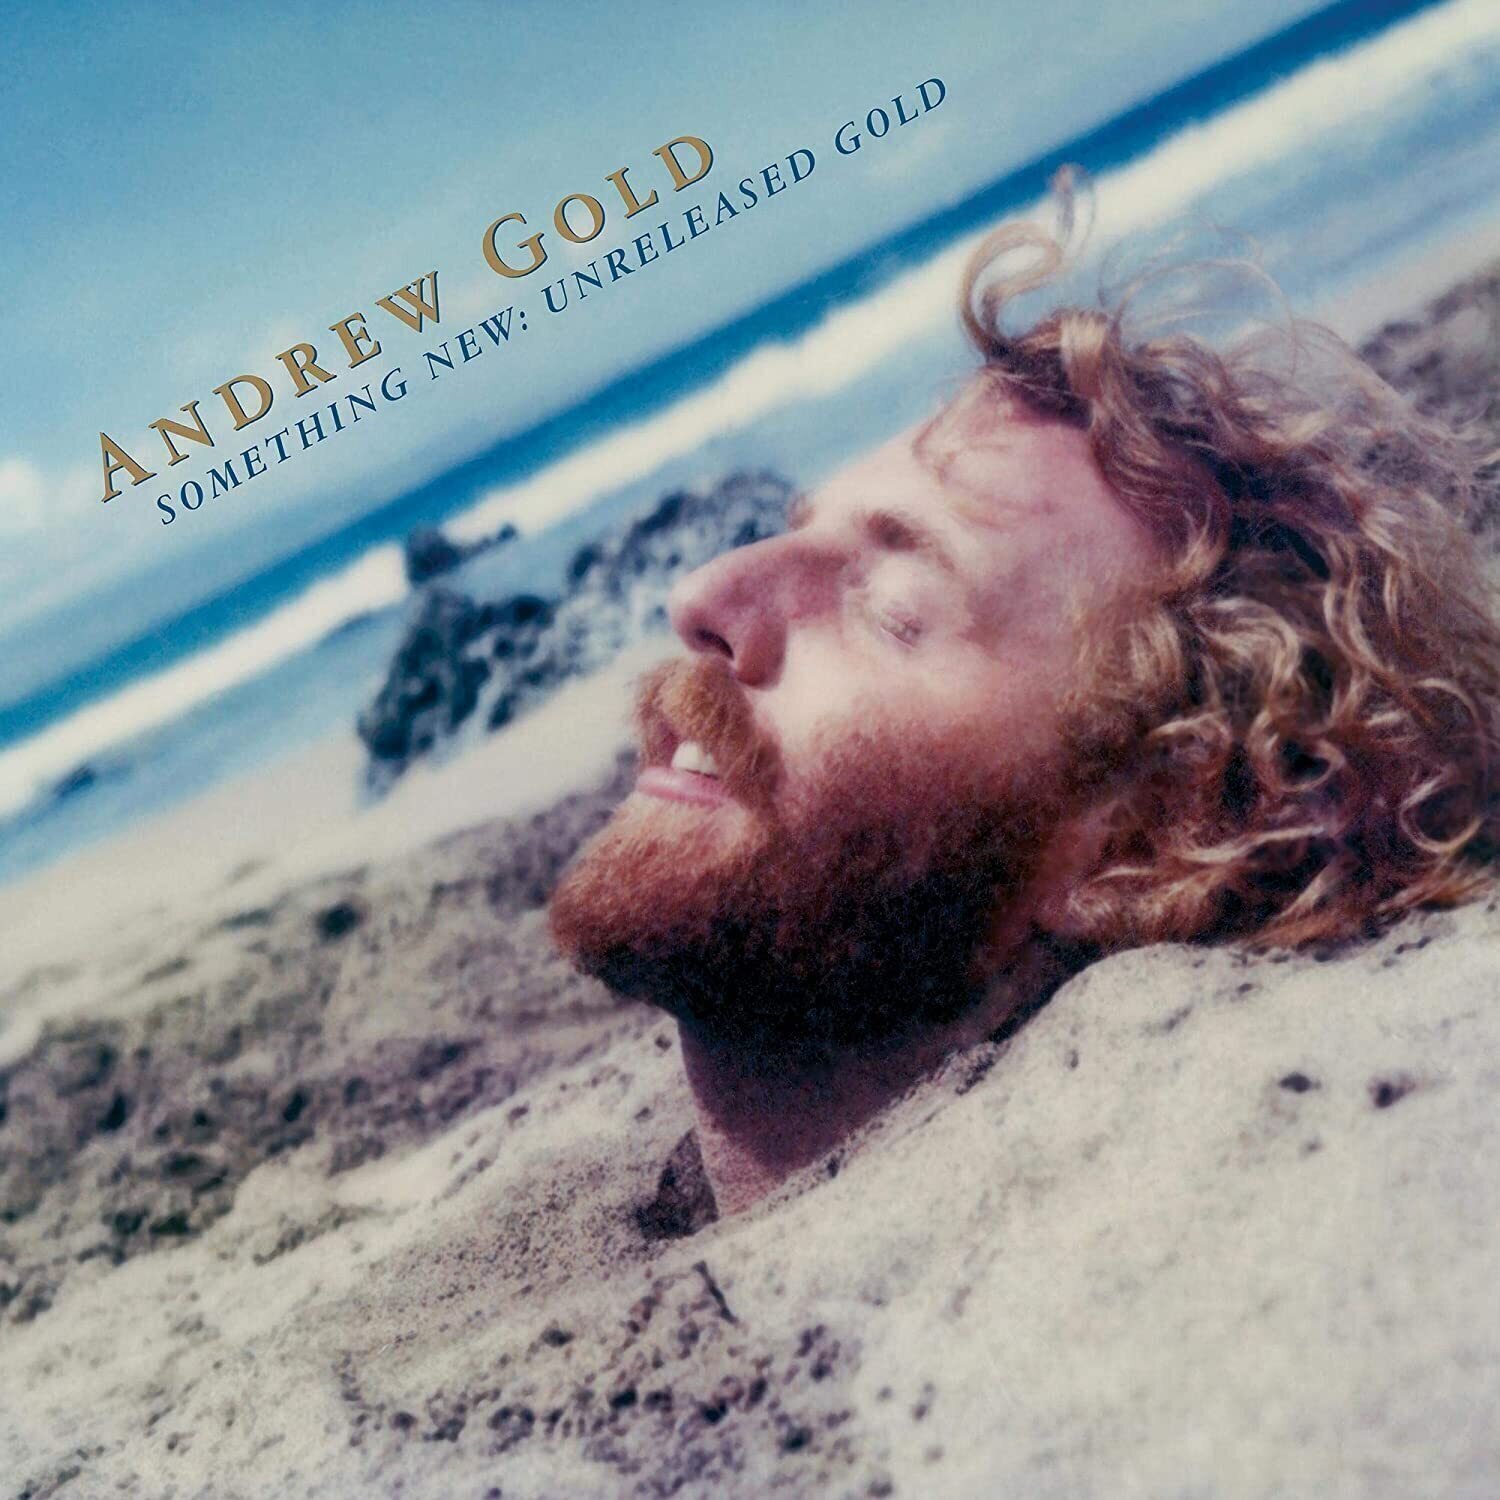 Vinyl Record Andrew Gold - Something New: Unreleased Gold (RSD) (LP)